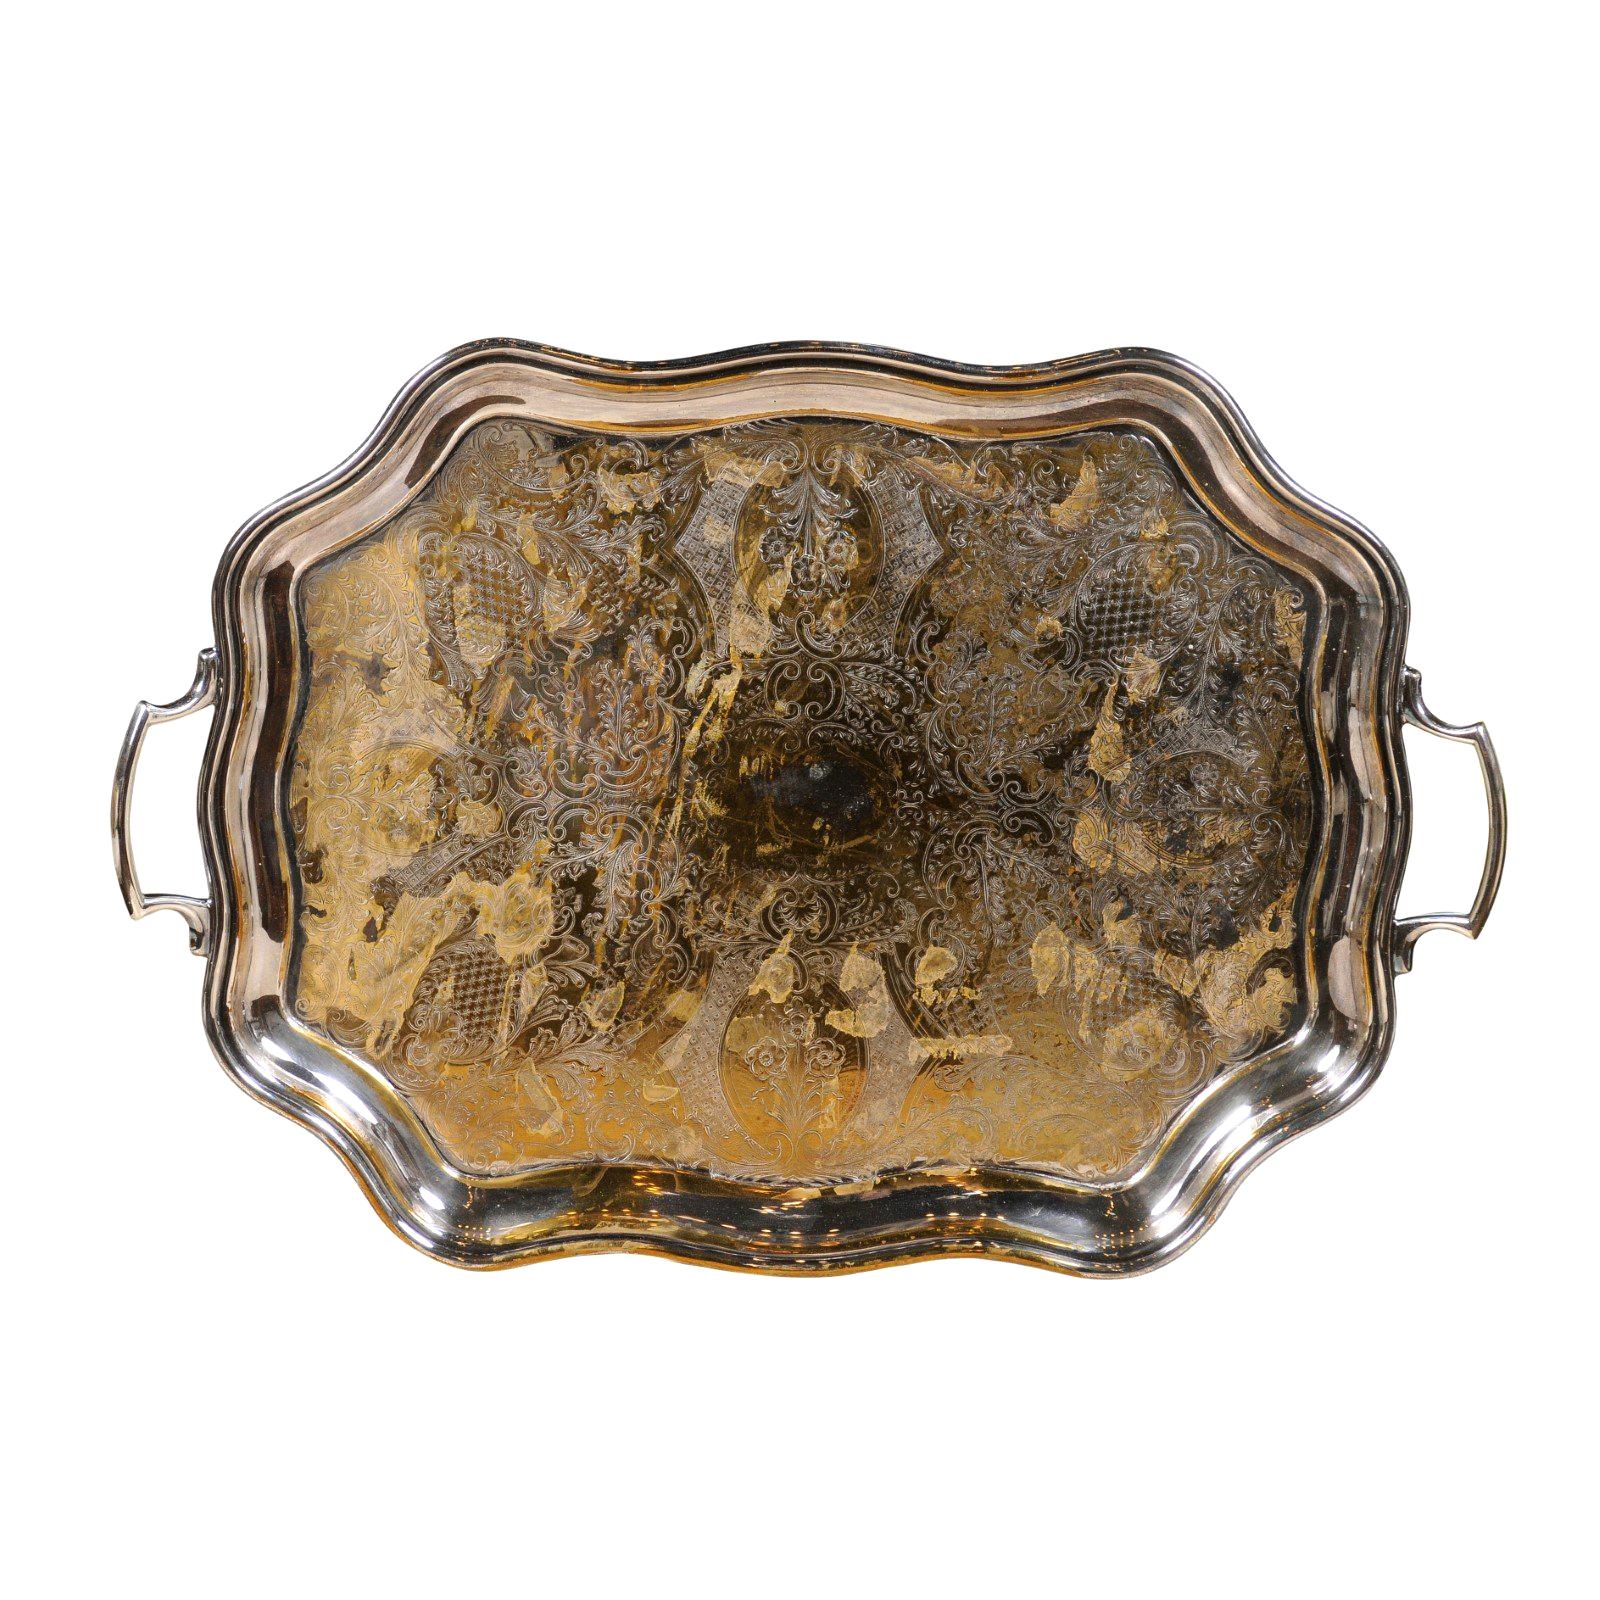 English 19th Century Silver Plate Tray with Chased Décor and Lateral Handles